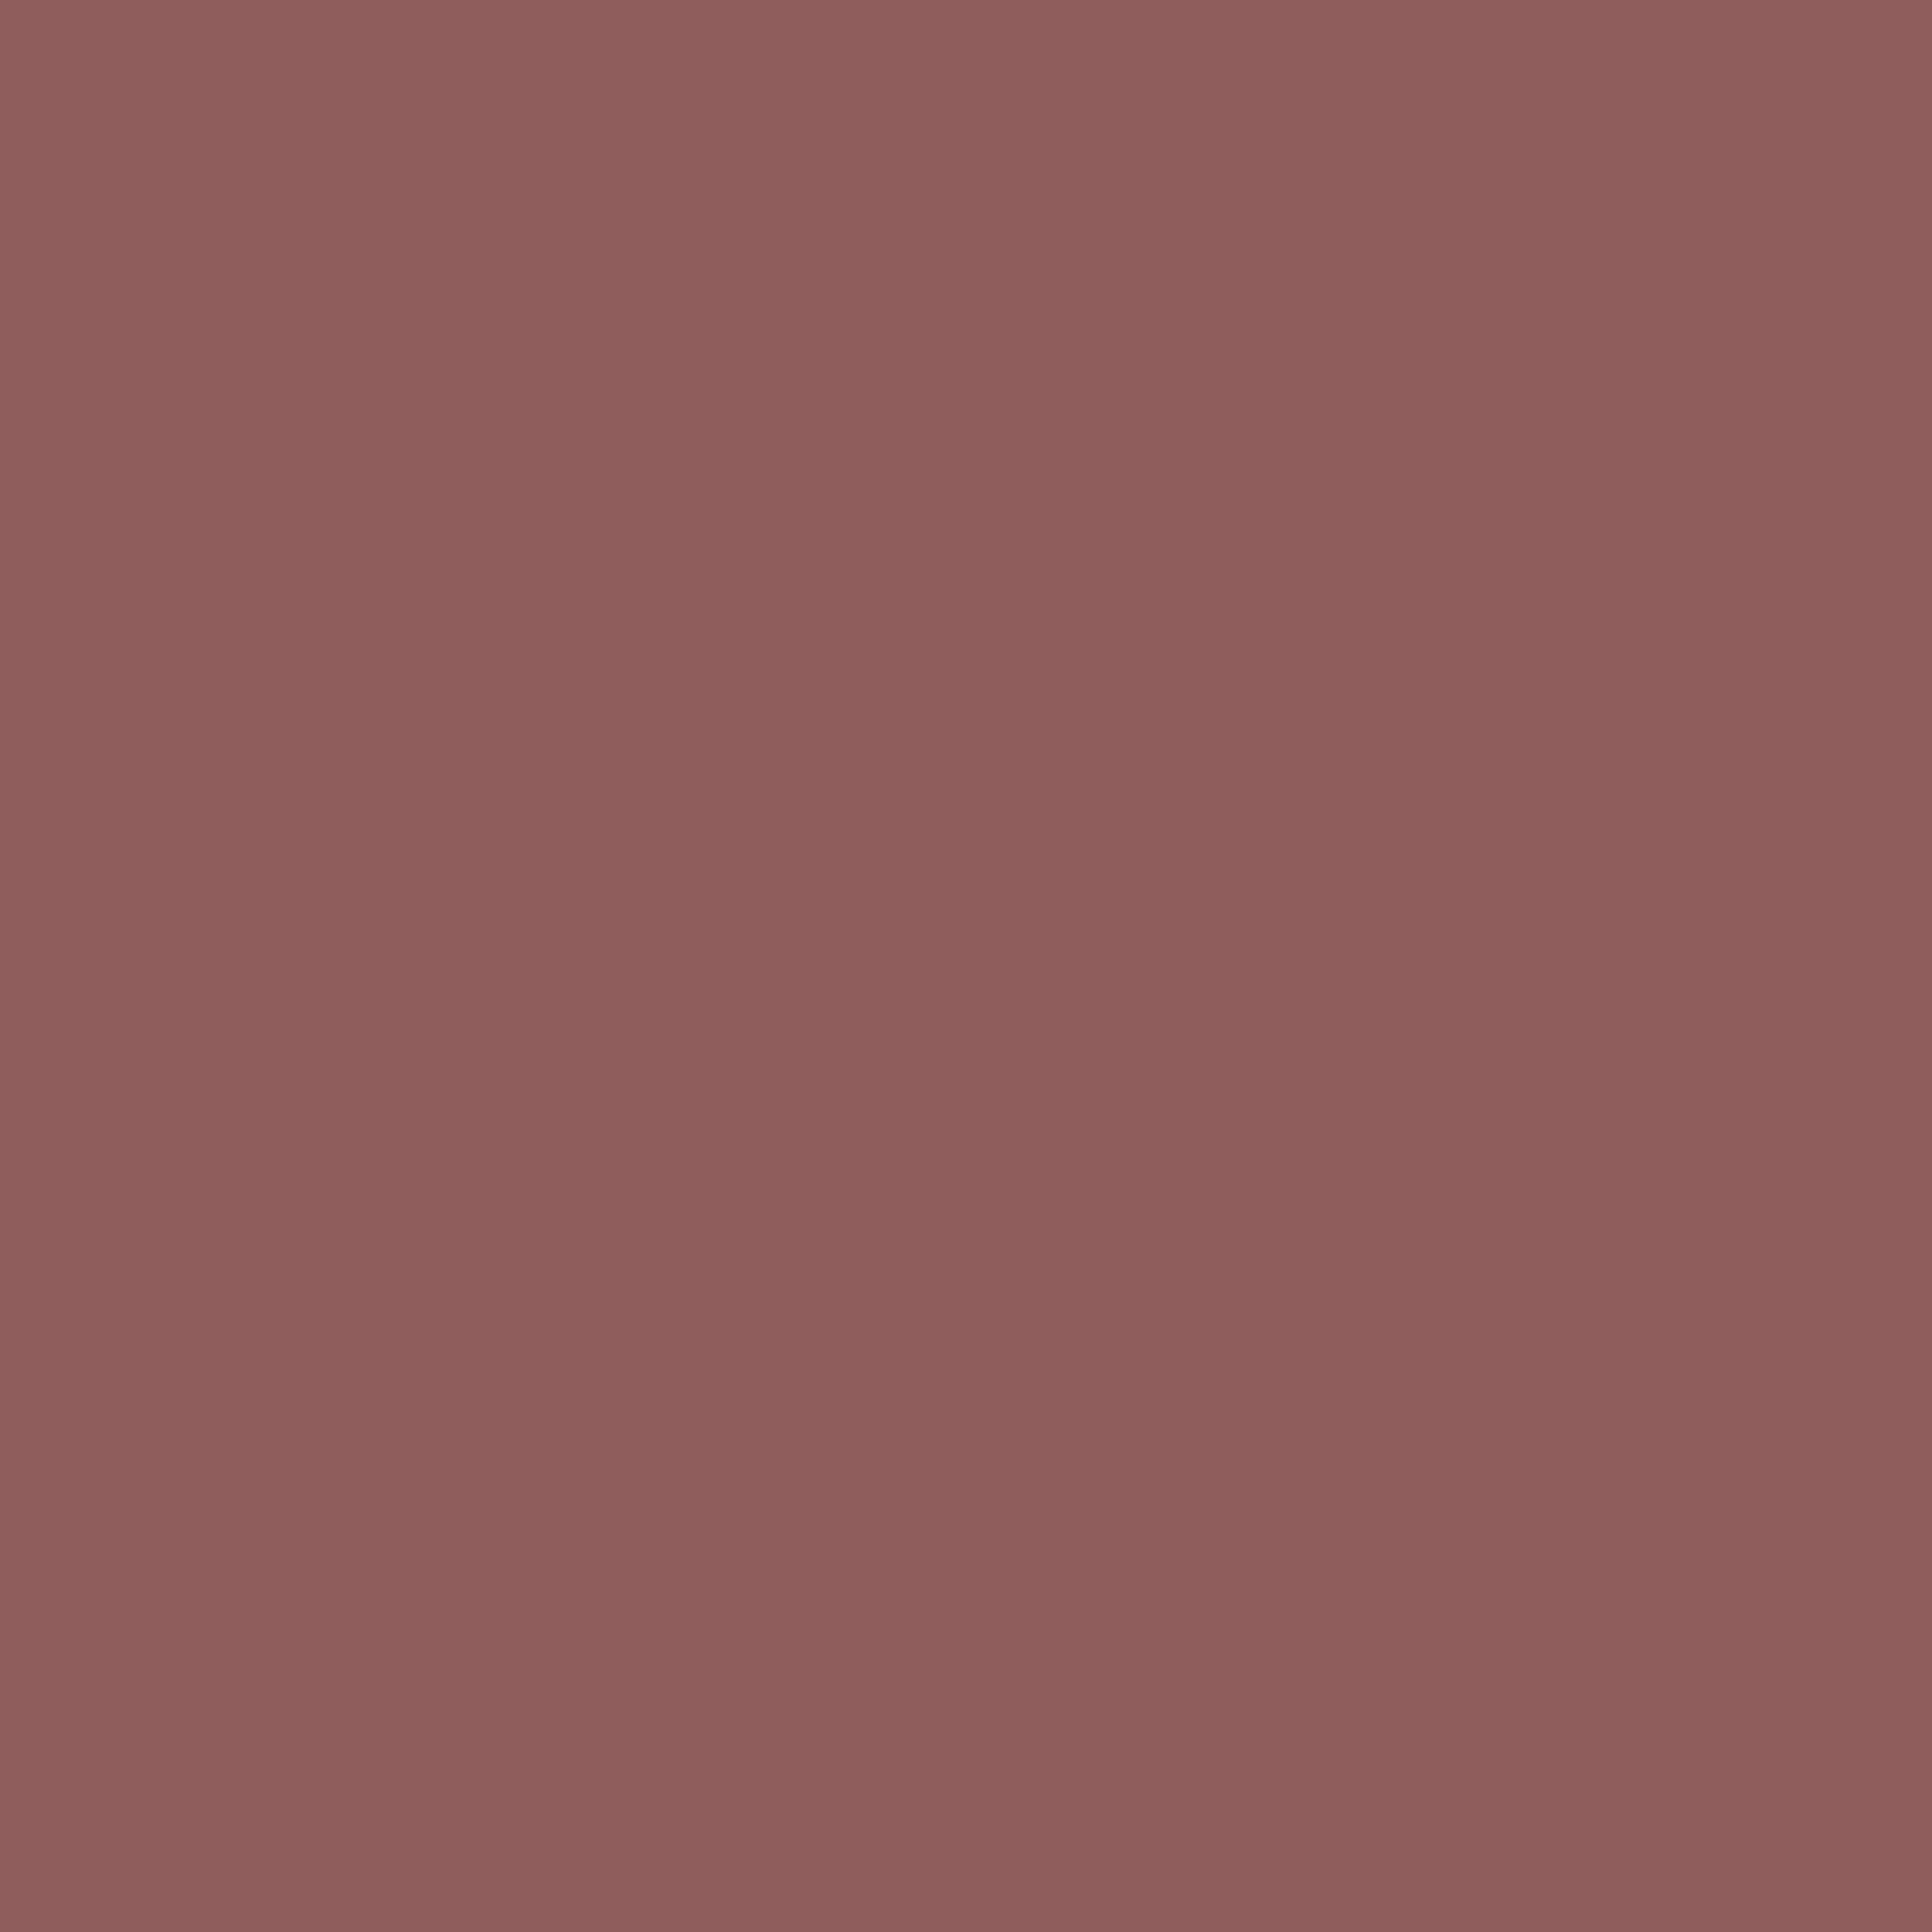 2048x2048 Rose Taupe Solid Color Background